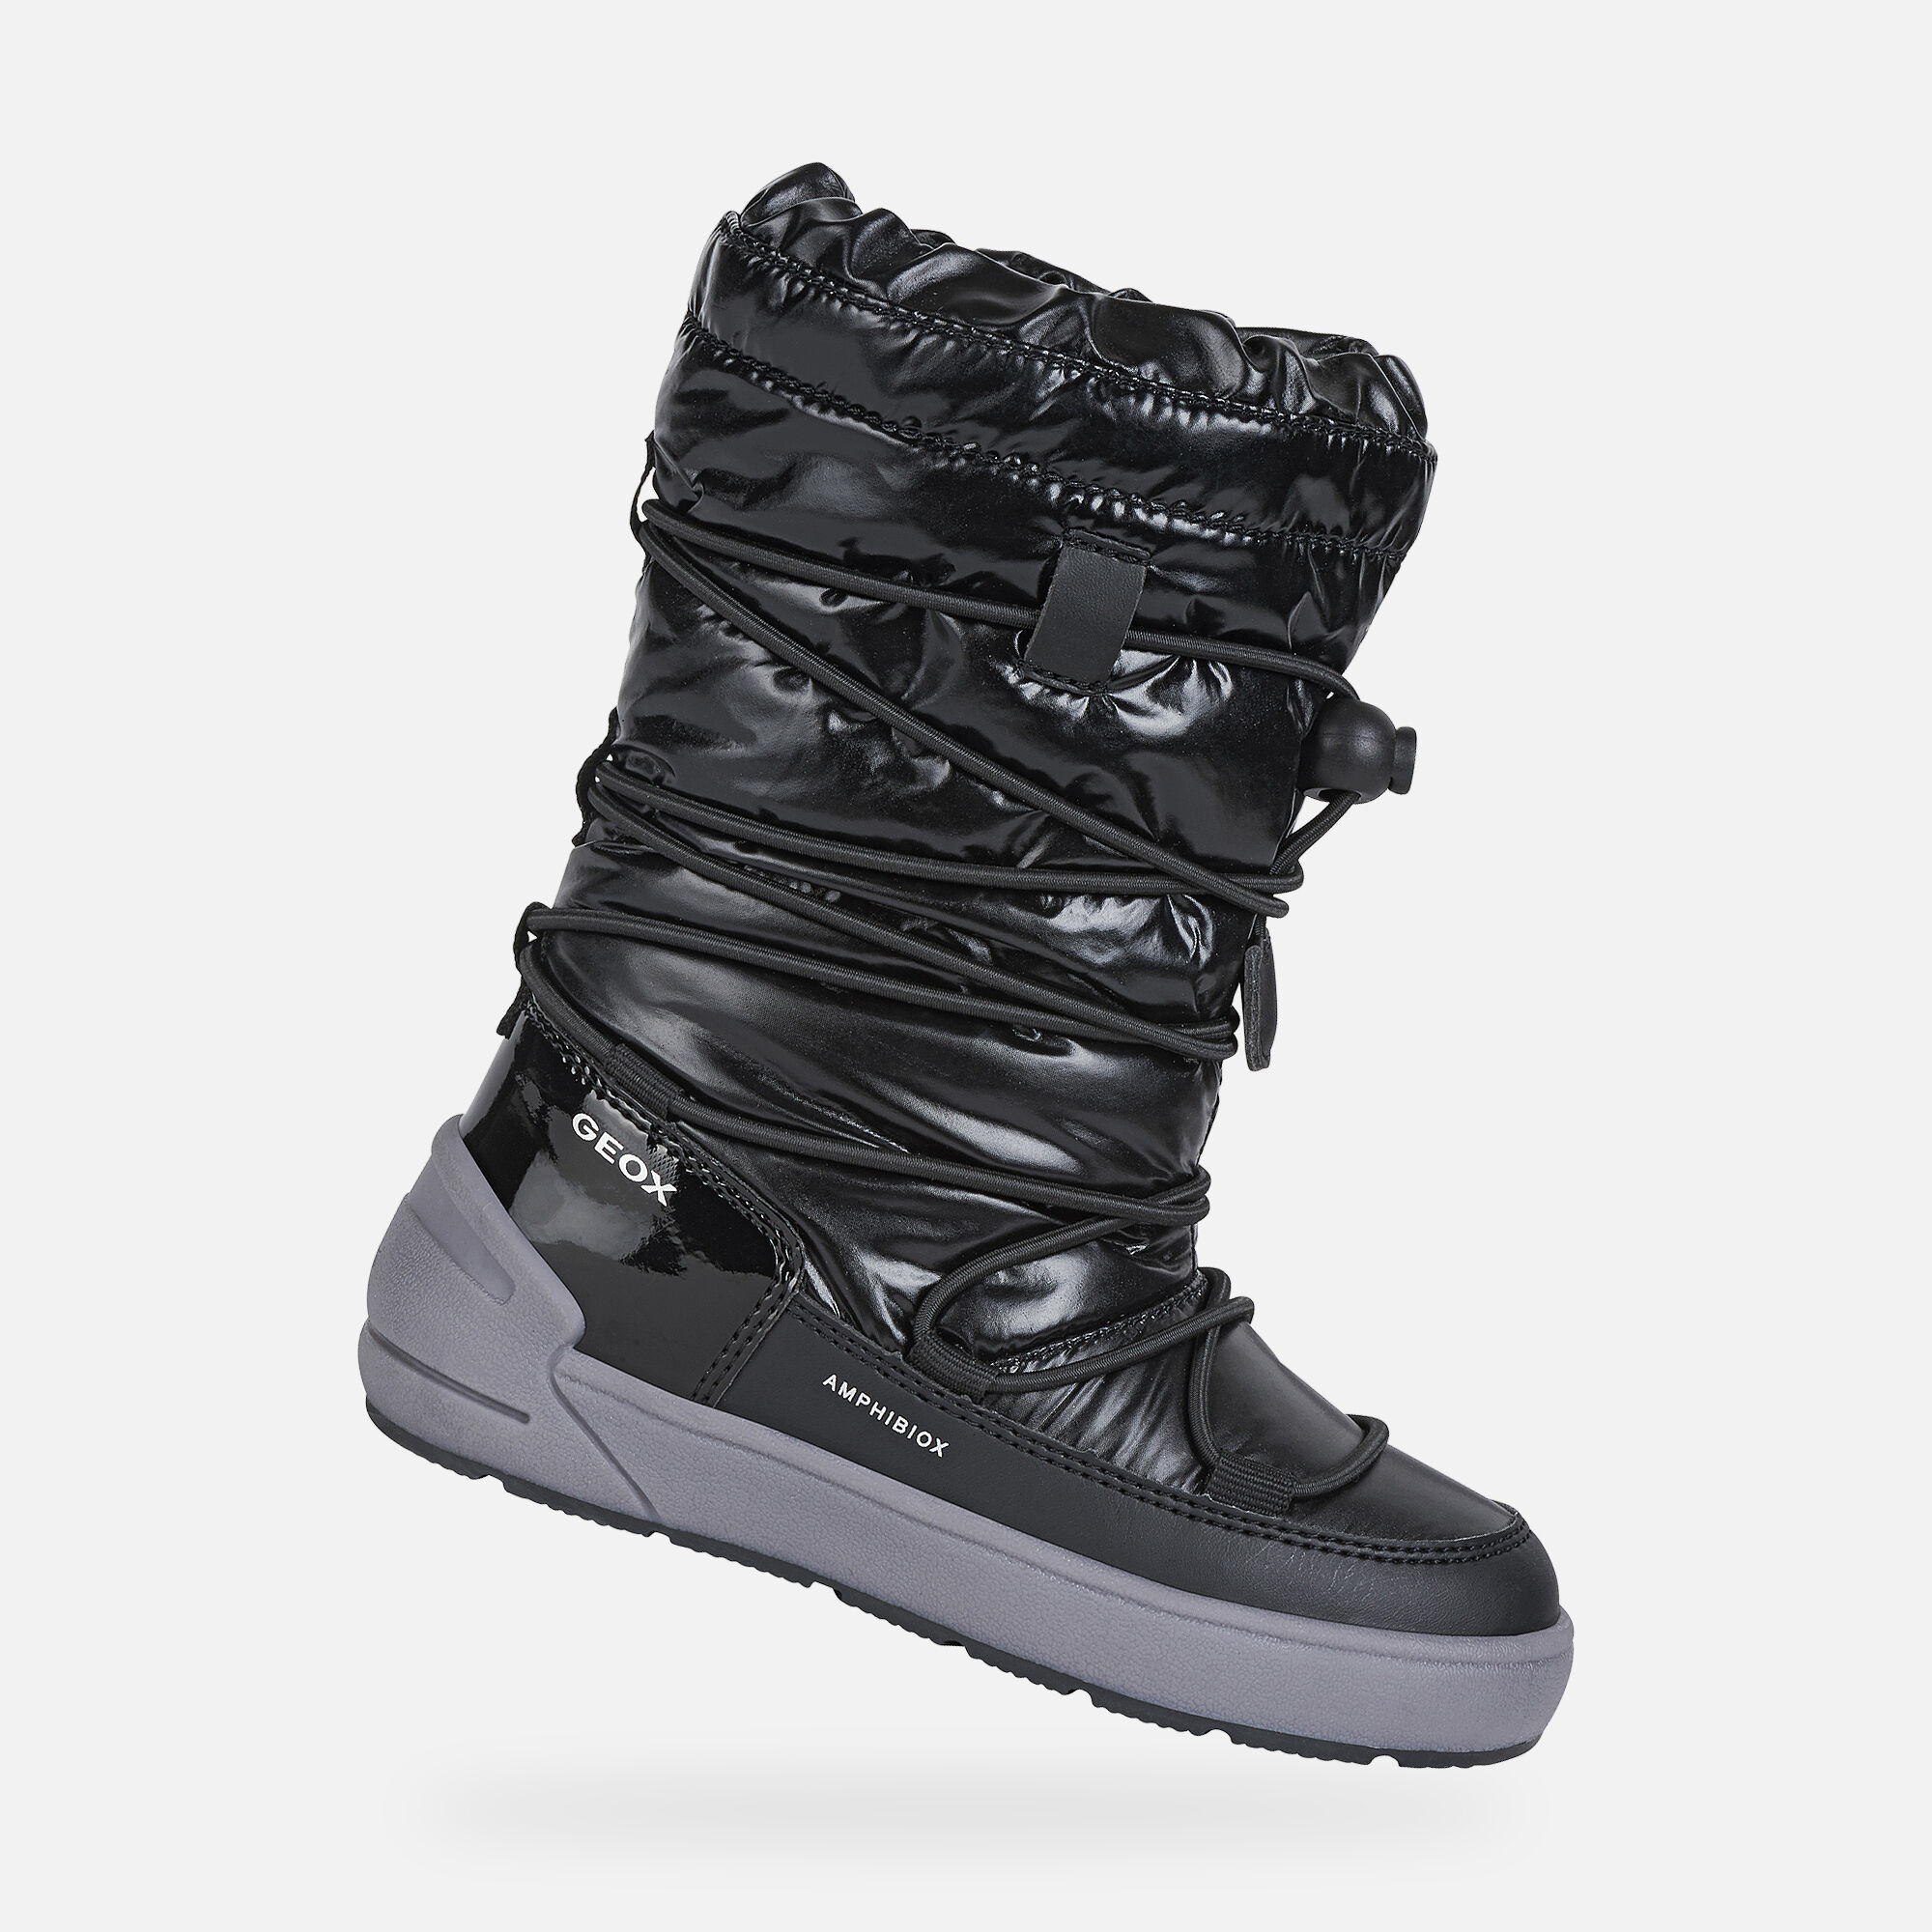 SLEIGH ABX GIRL - BOOTS from girls | Geox